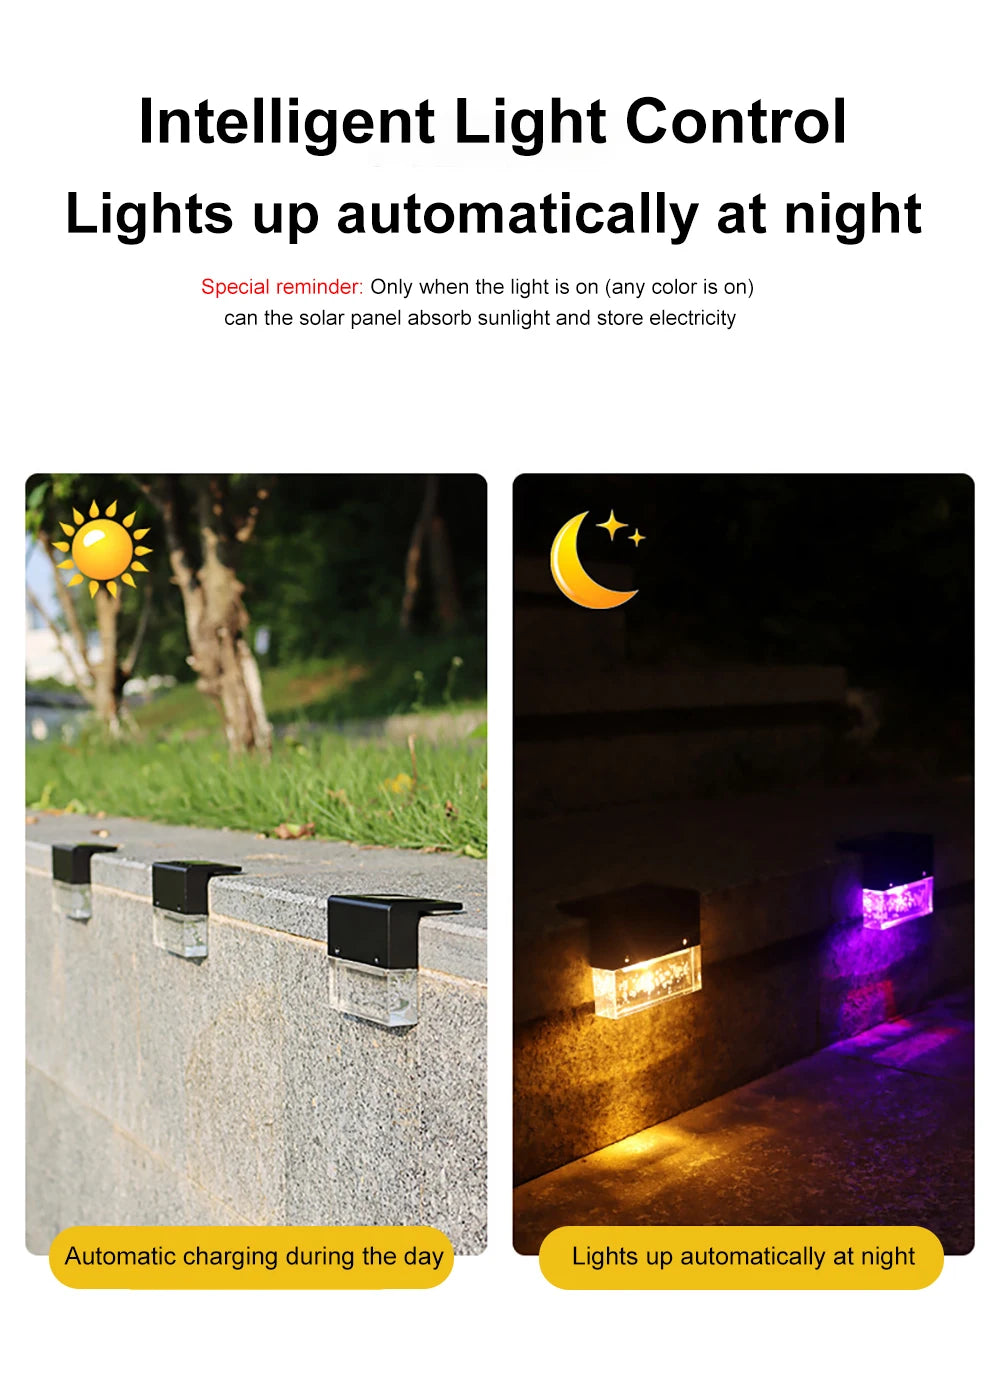 Solar LED Light, Automated solar-powered lantern that turns on at night and off during daylight.